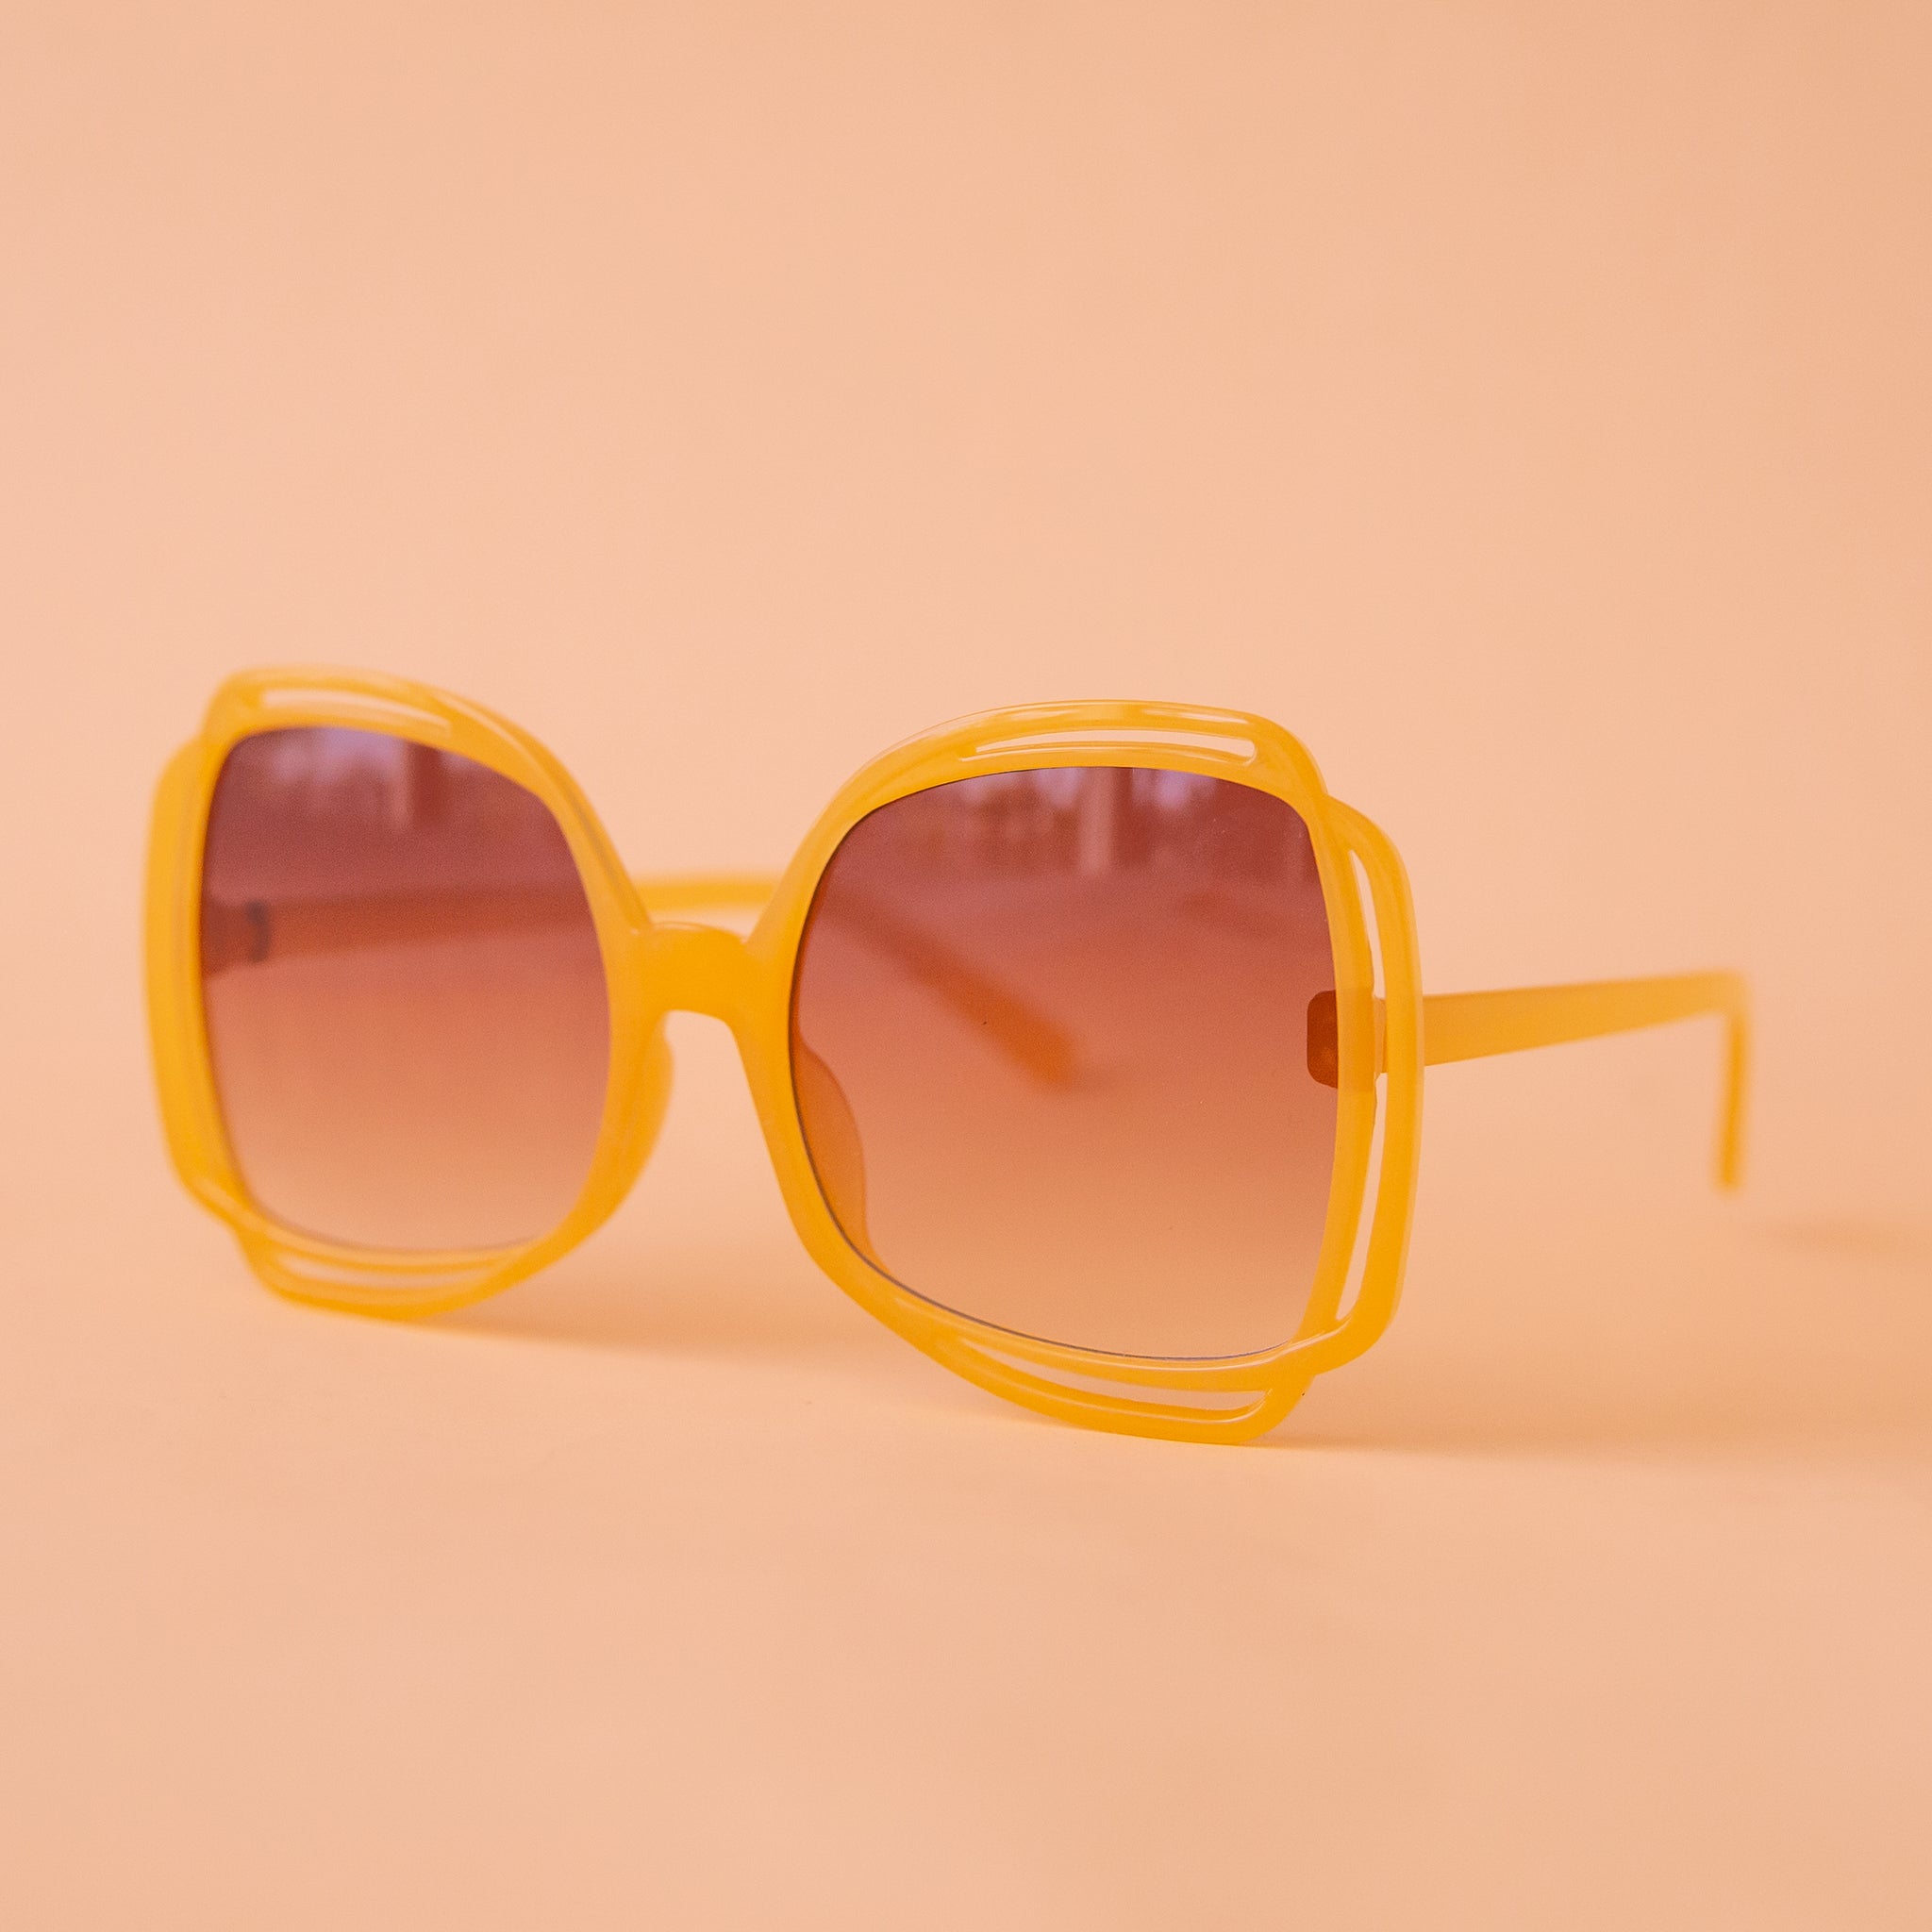 A pair of round sunglasses with yellow frames and a brown gradient lenses.